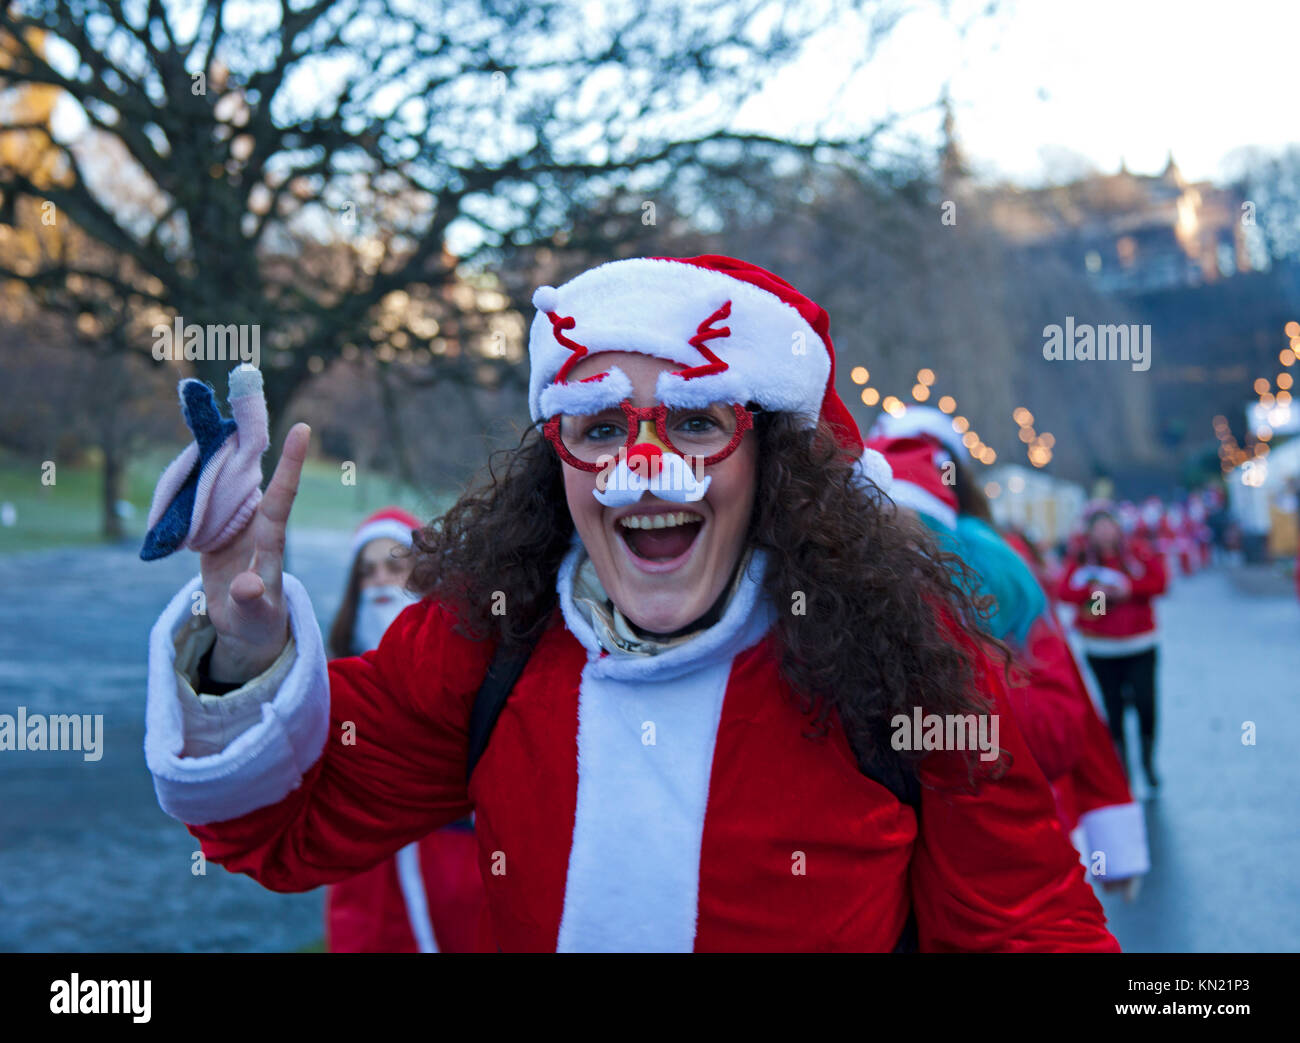 10 Dec. 2017. Edinburgh Santa Run, West Princes Street Gardens, Scotland,UK. Freezing conditions where the temperature dropped to minus six overnight. When you wish upon a star, dream making for sick children Stock Photo